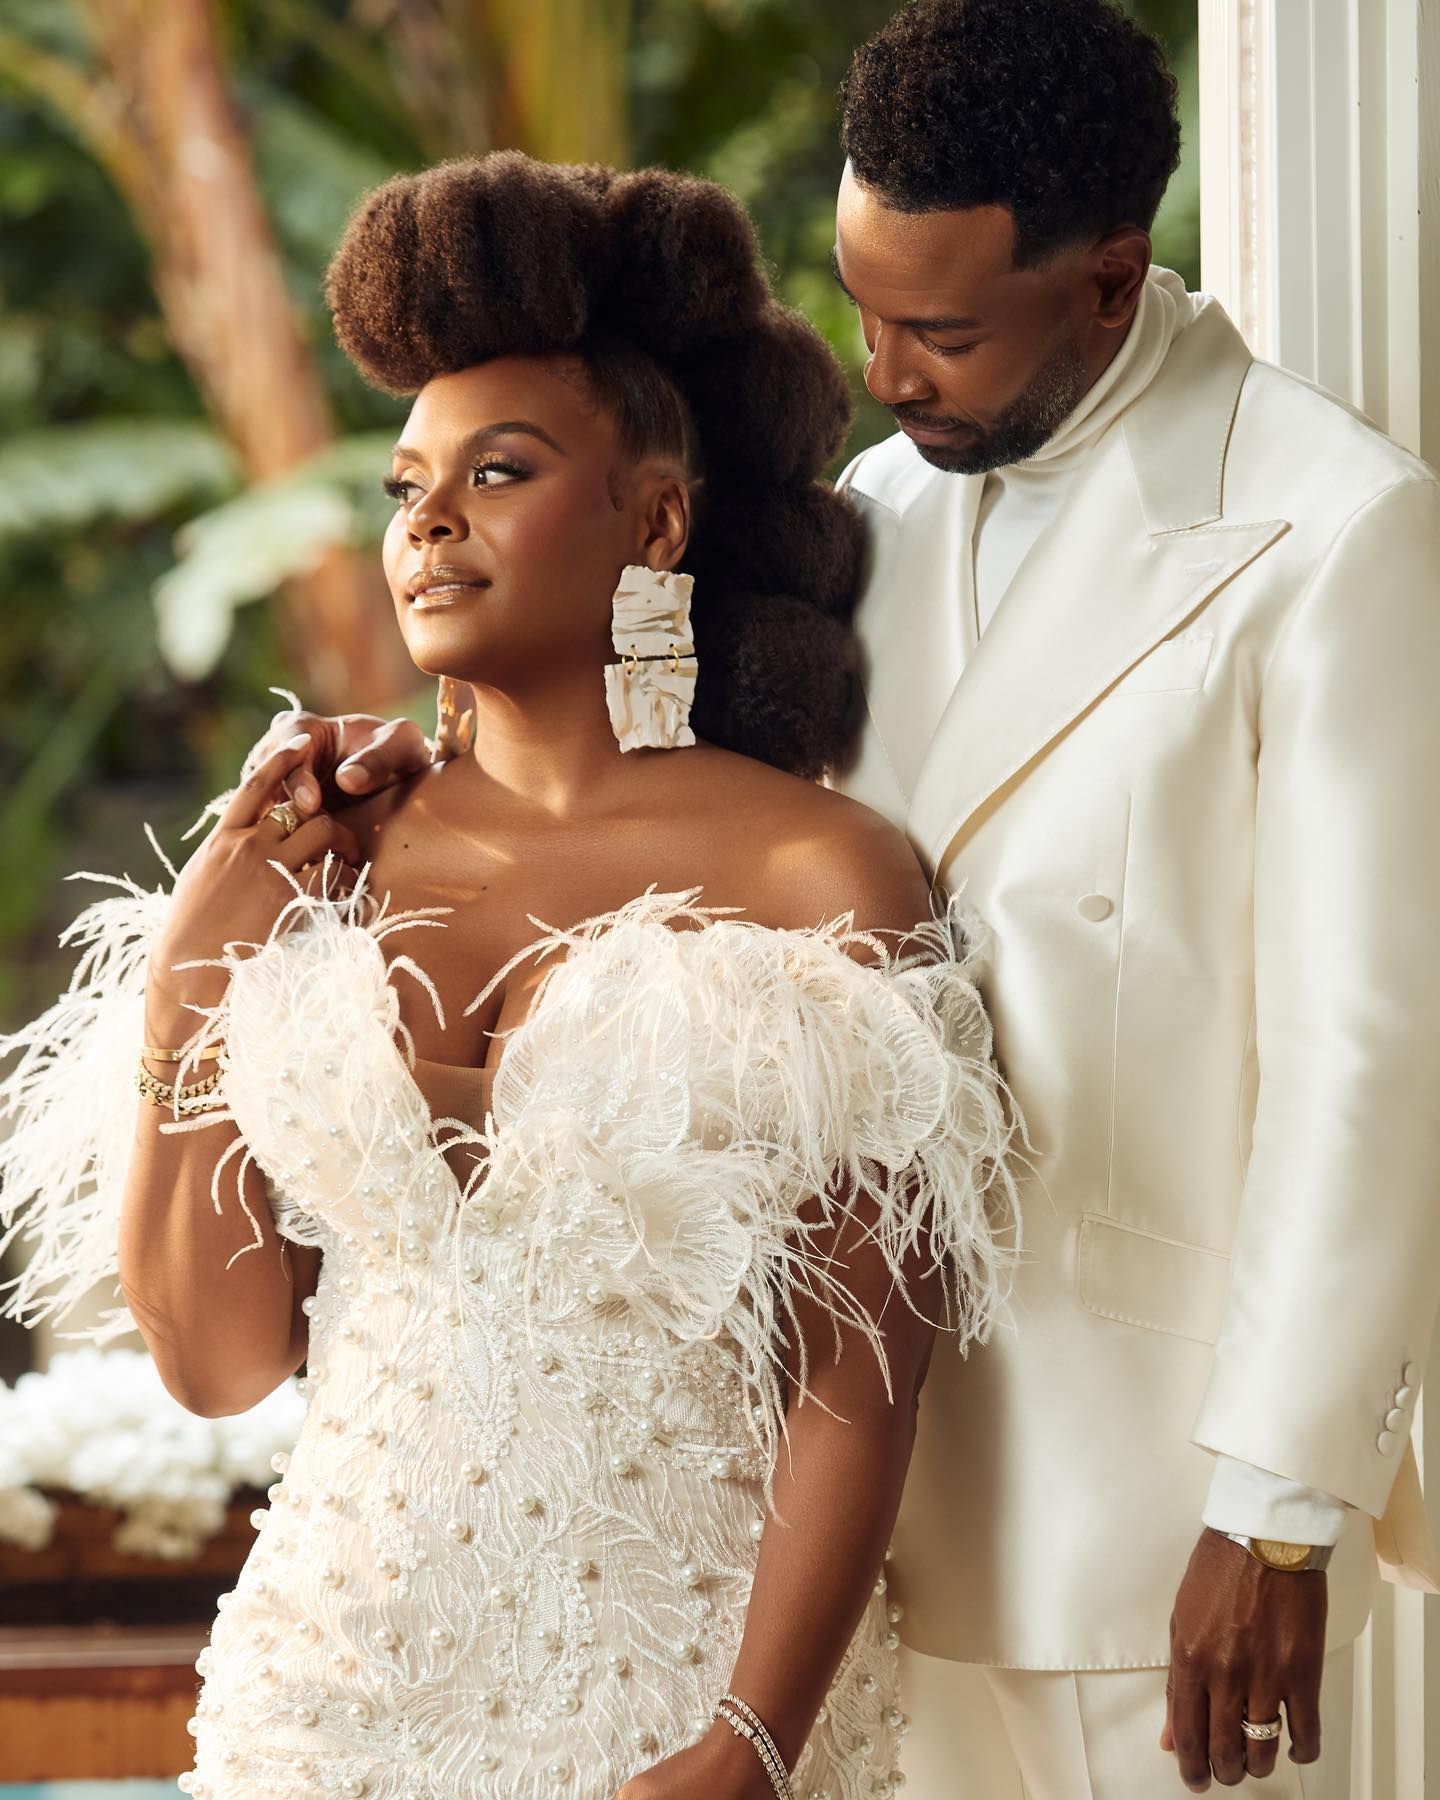 Tabitha Brown And Husband Chance Celebrate 20th Wedding Anniversary With A Stunning Photo Shoot